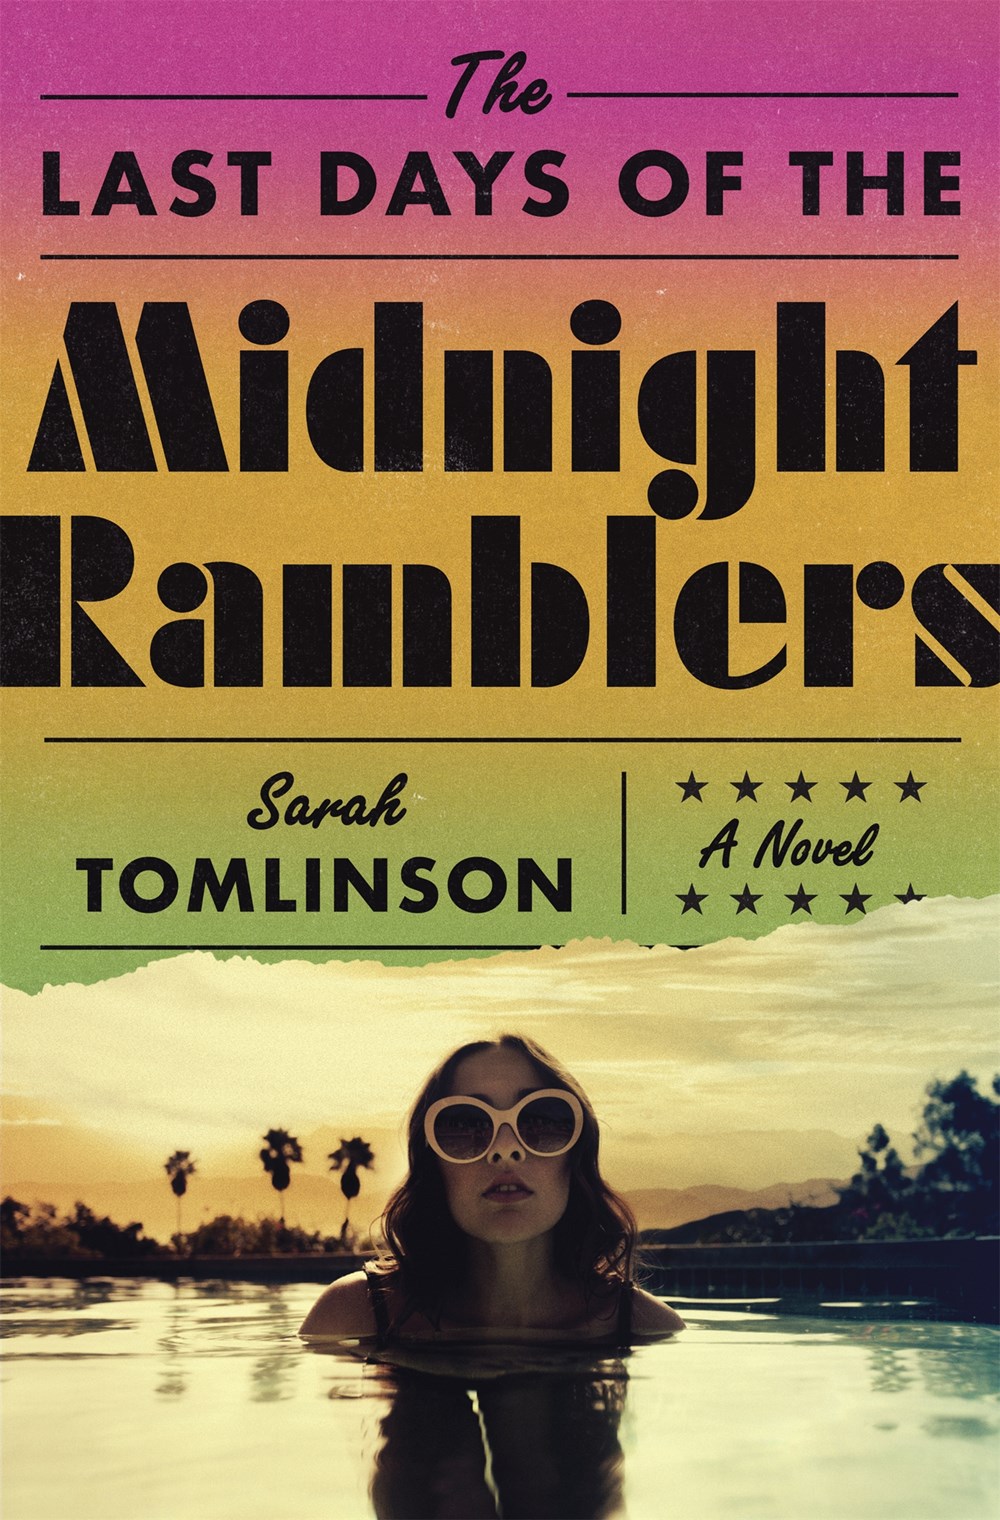 The Last Days of the Midnight Ramblers by Sarah Tomlinson